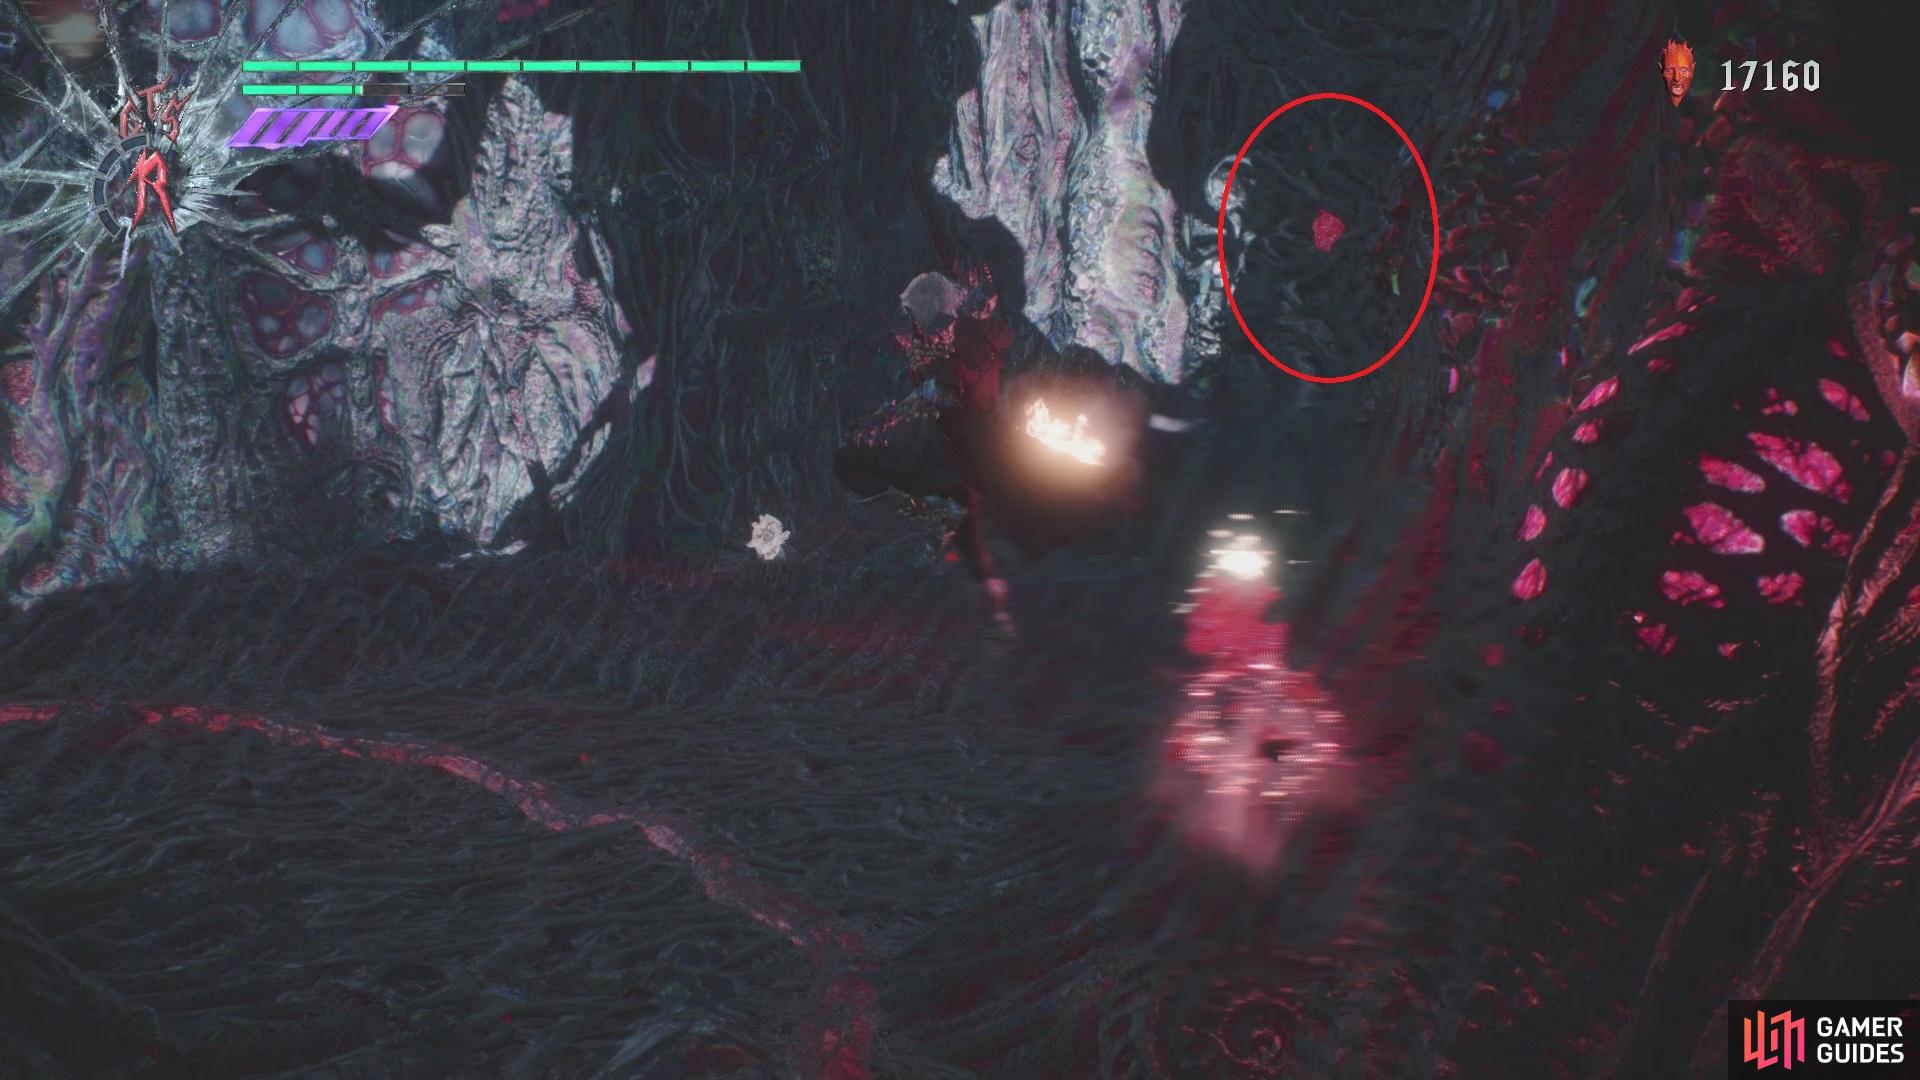 The hidden entrance to the tunnel is marked by a Red Orb